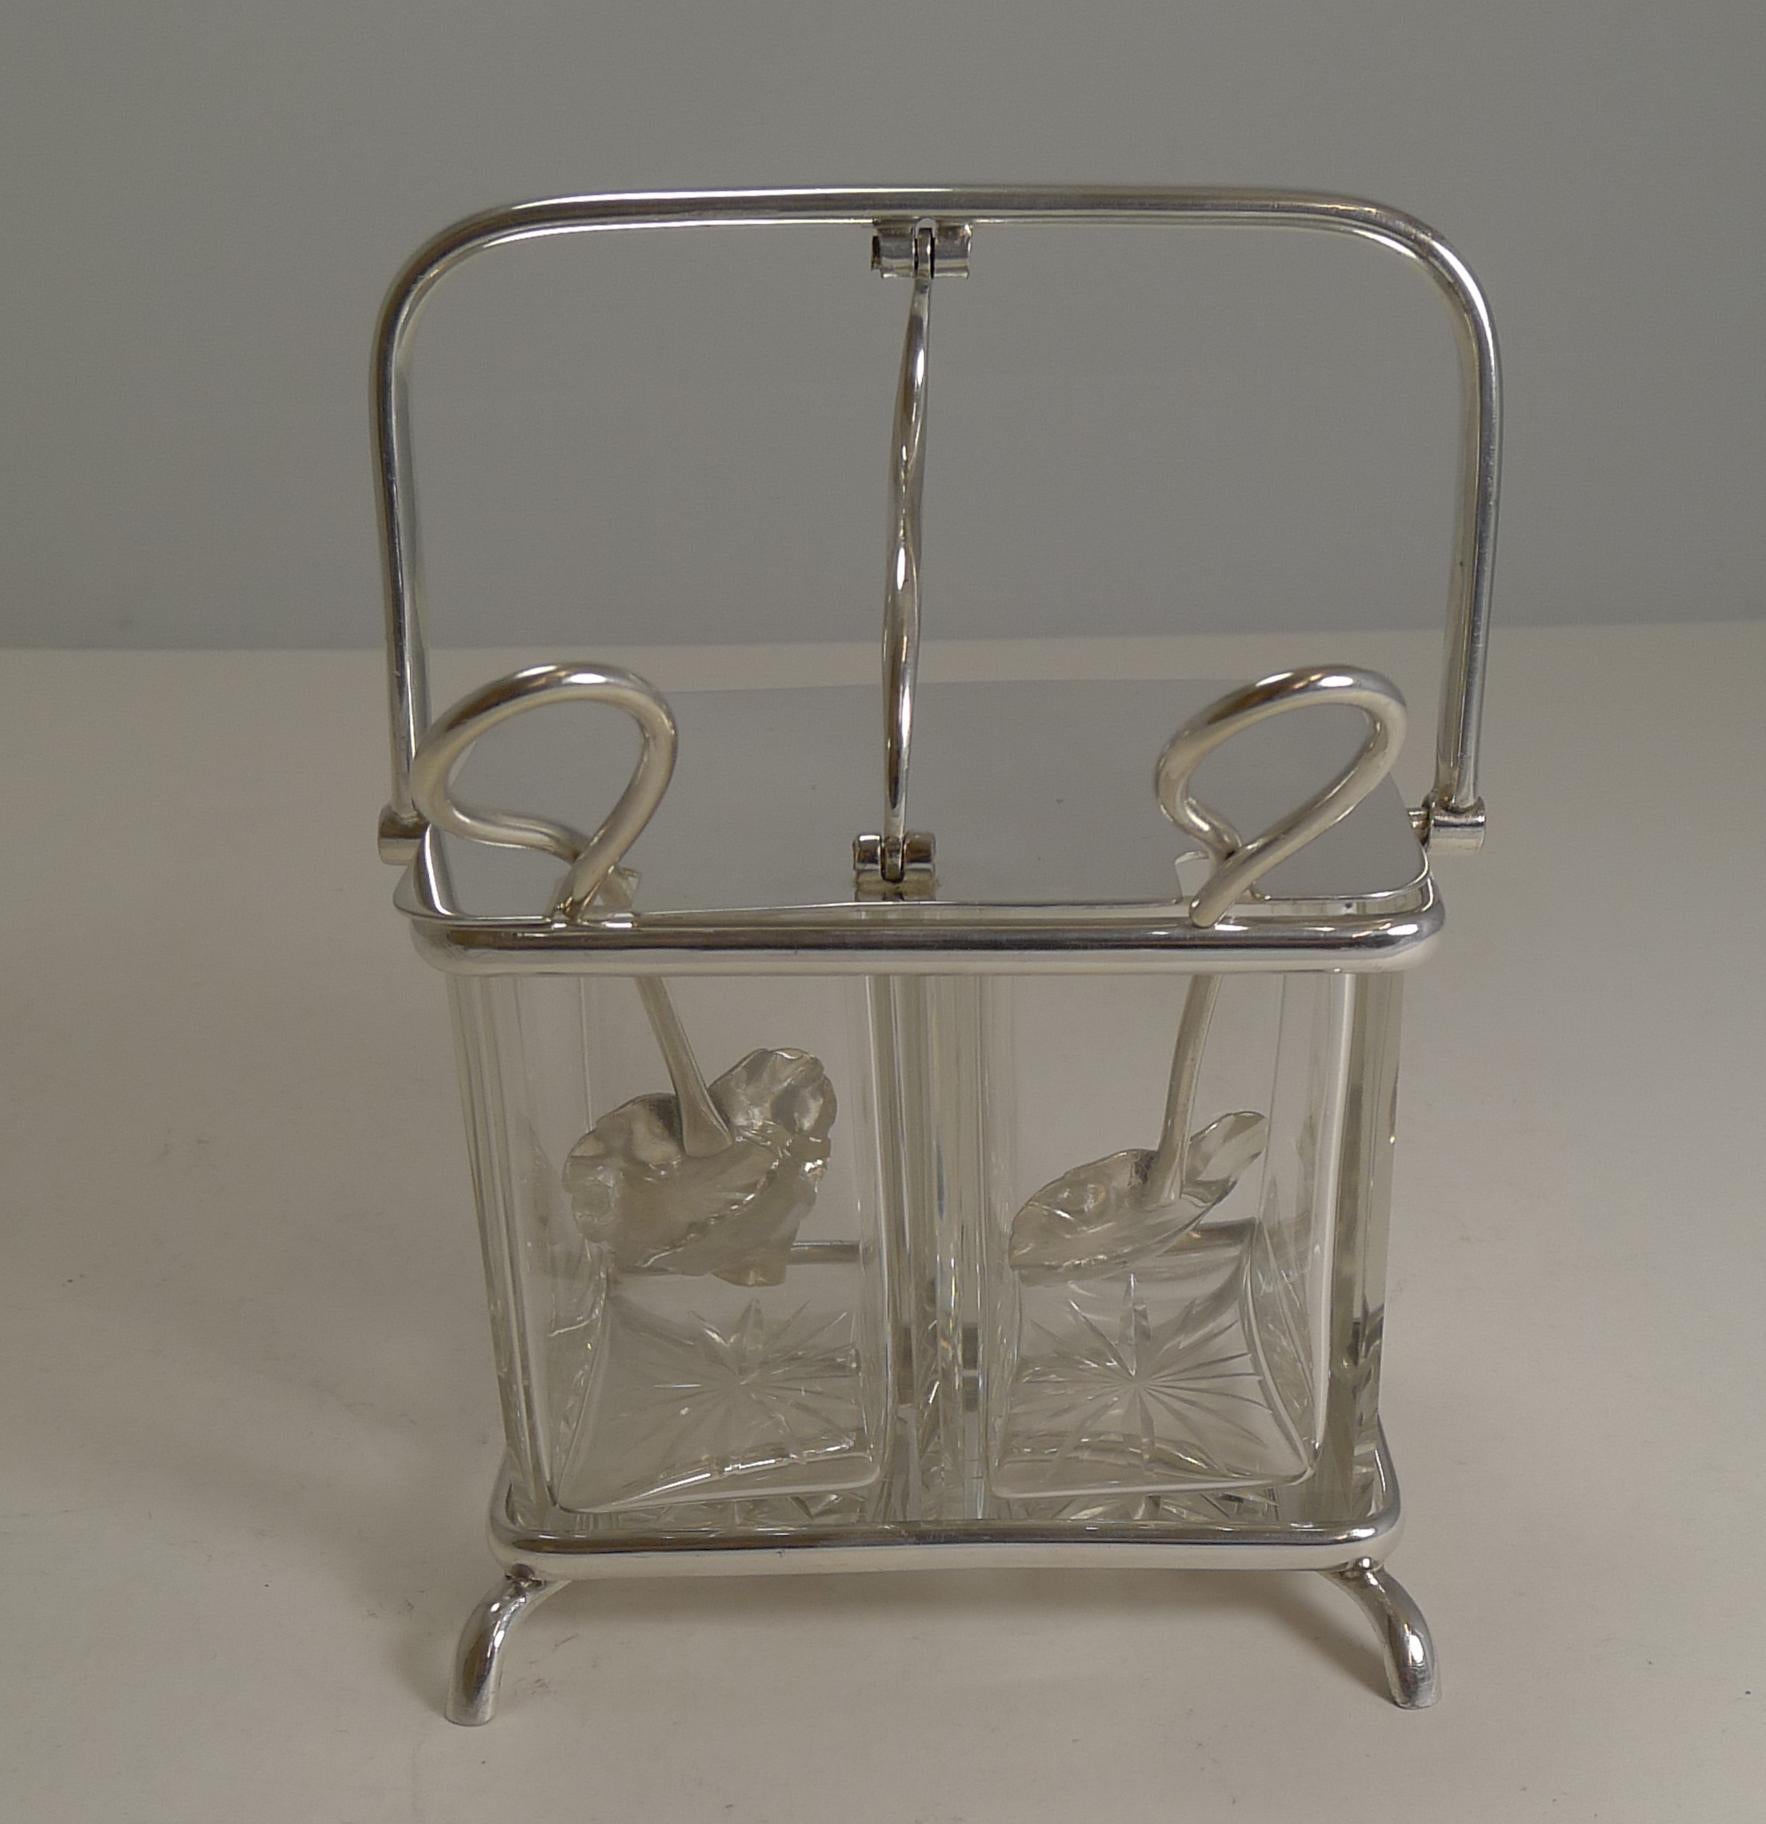 Early 20th Century Antique Double Automated Preserve / Jam Box by Goldsmiths and Silversmiths Co.